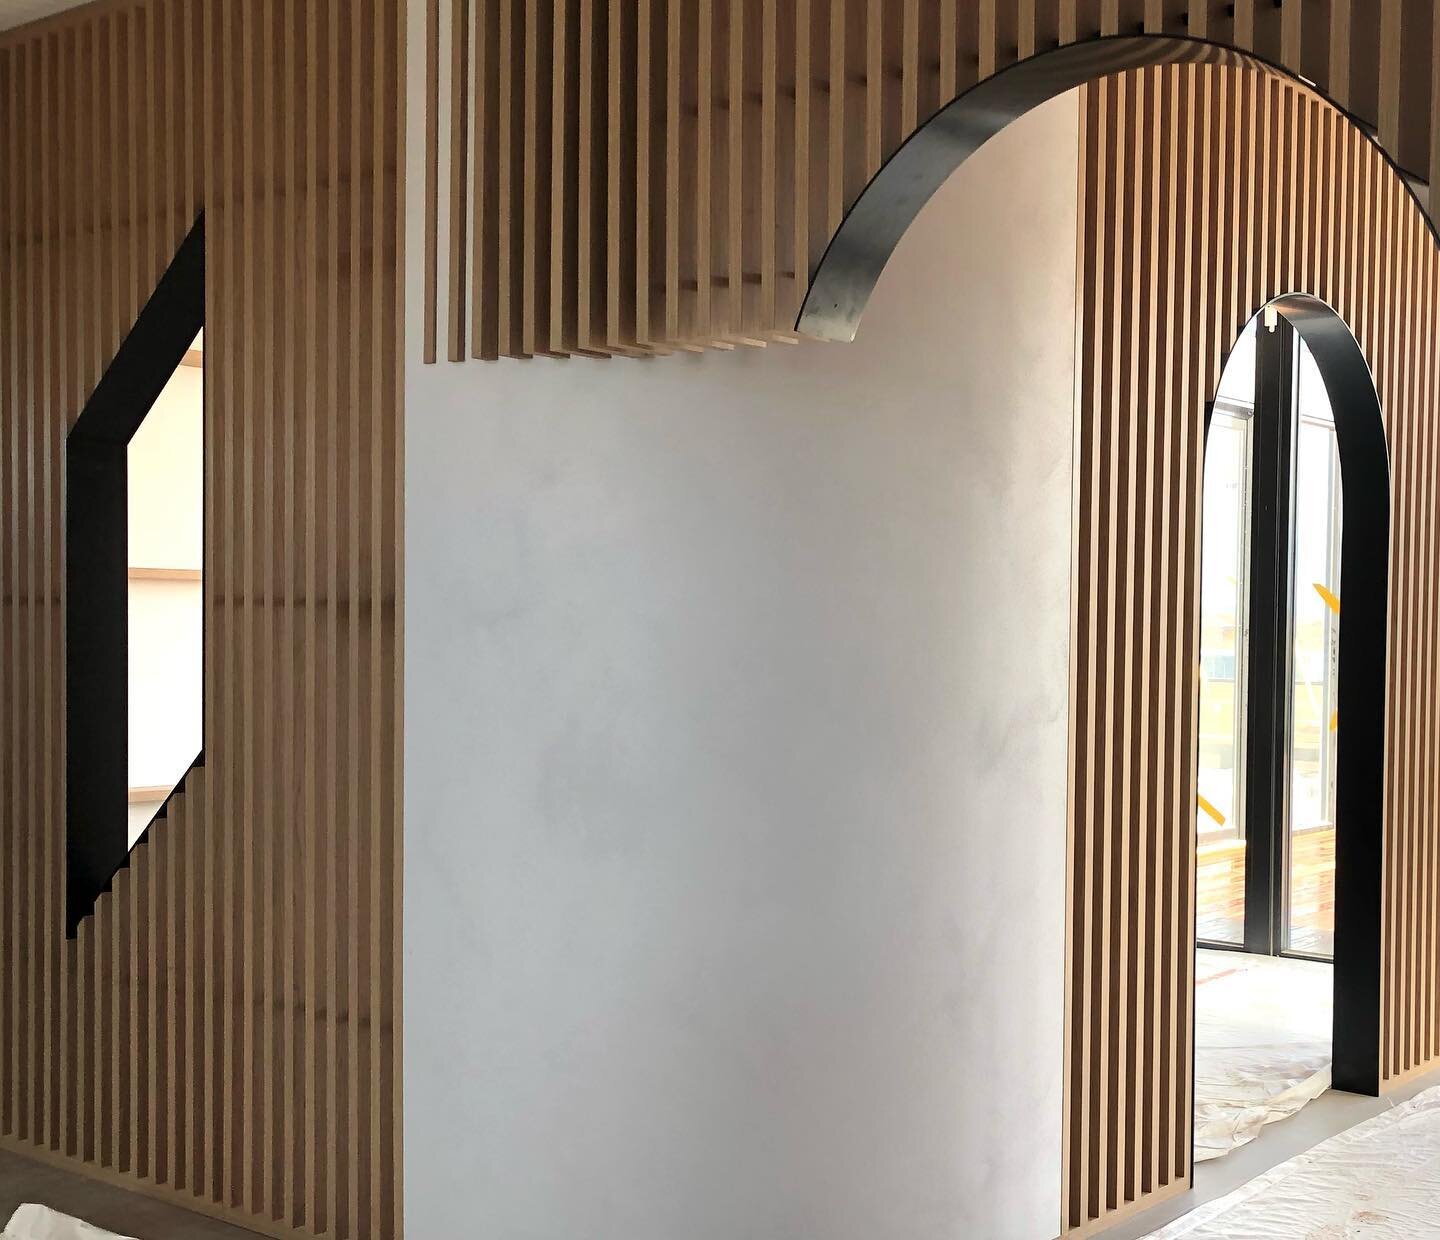 Joinery elements for our project currently installing. These curved feature panels in @porterspaints Stone Paint are working nicely to balance the vertical battens and geometry of shape.